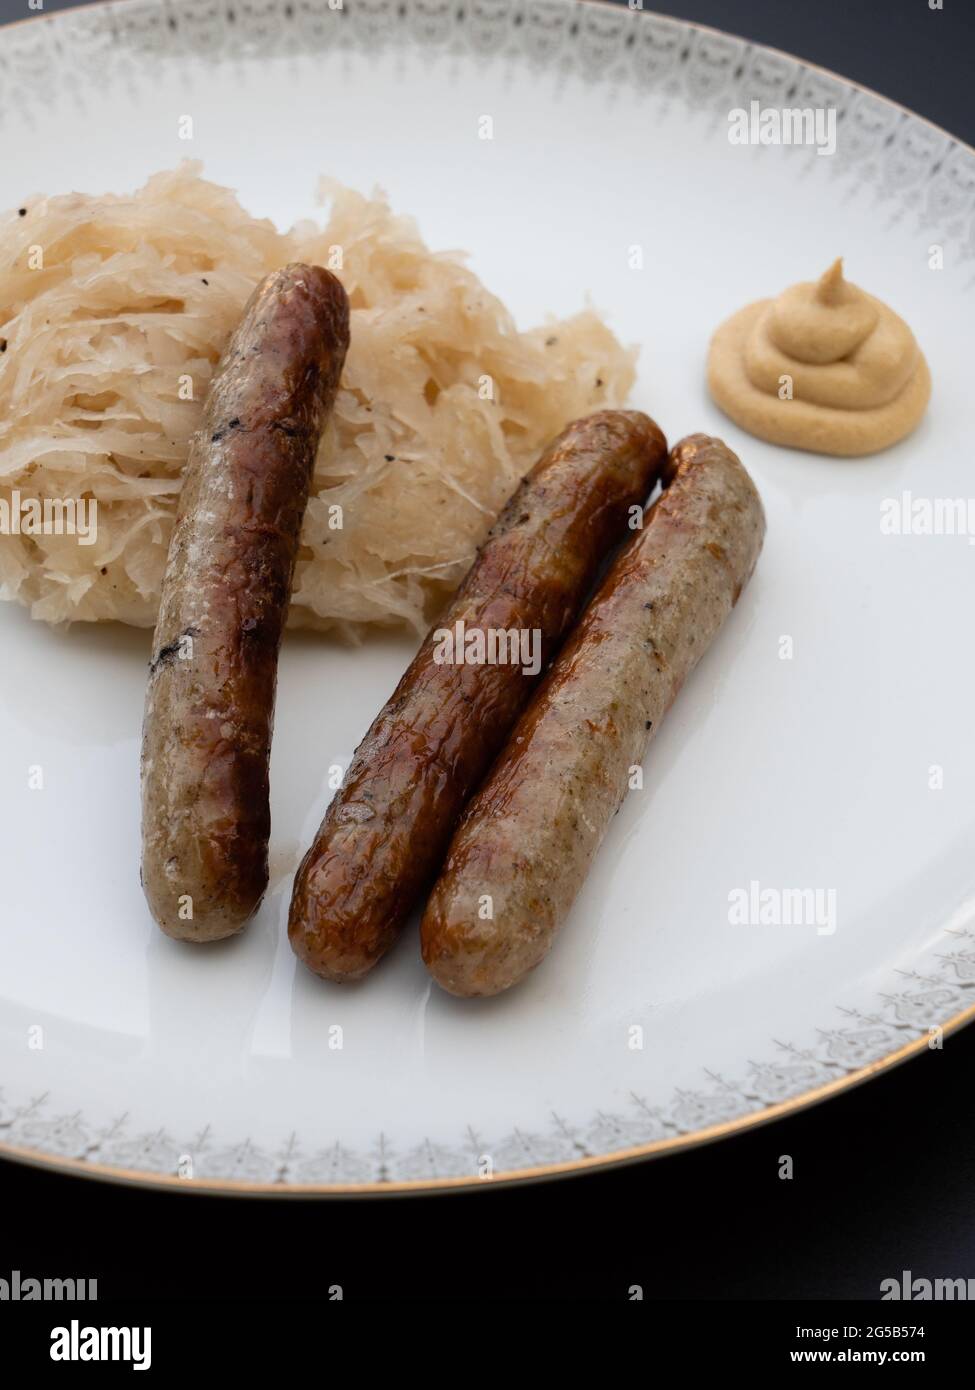 Nuremberg Grilled Sausage or Nürnberger Rostbratwurst with Sauerkraut or Sour Cabbage and Mustard on a White Plate Vertical Orientation Stock Photo